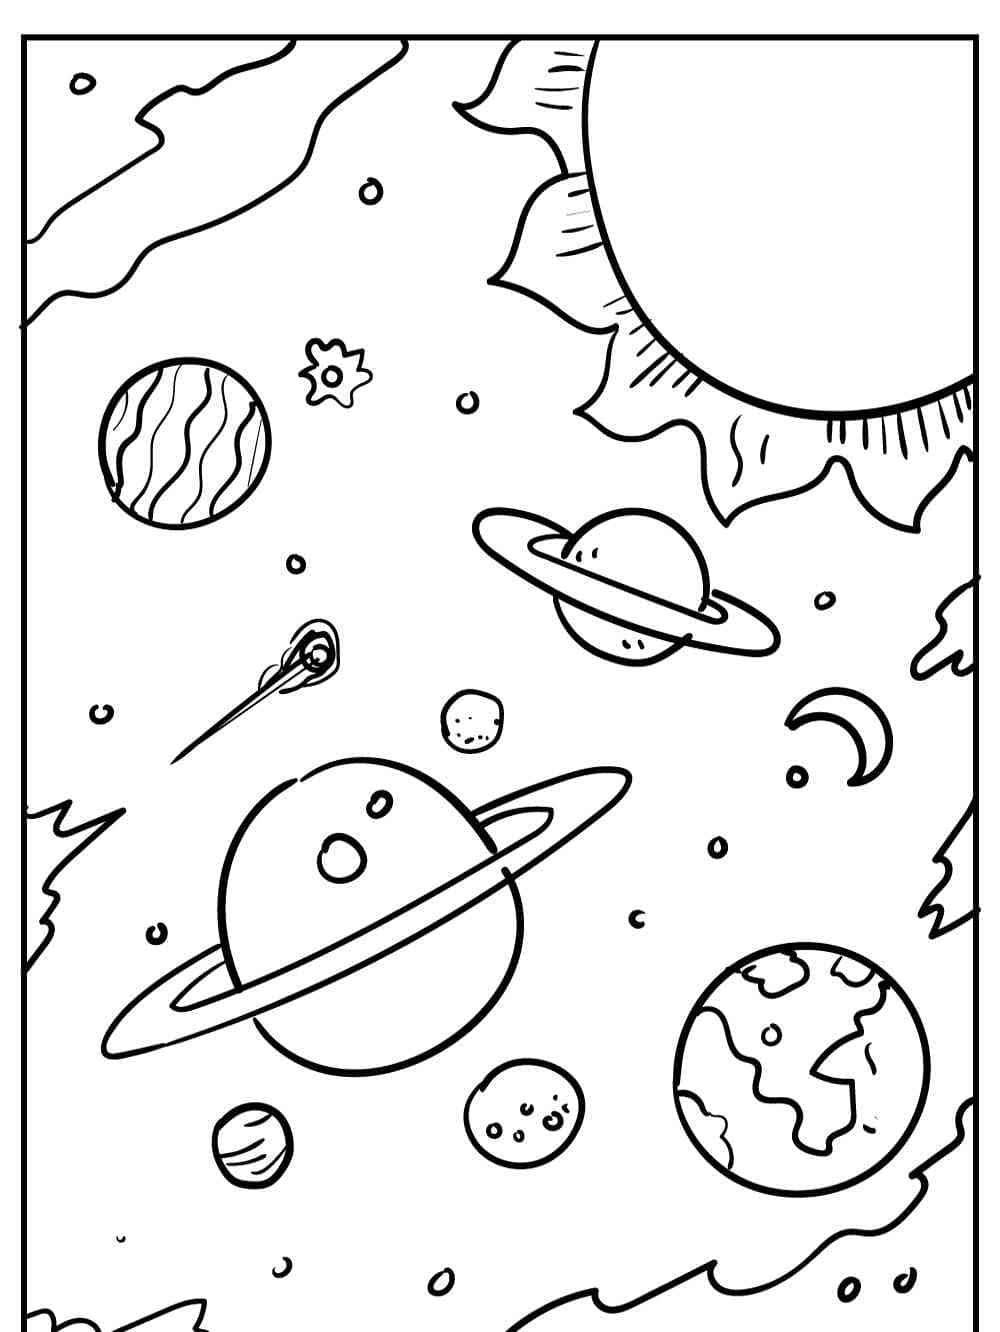 Outer space free coloring page